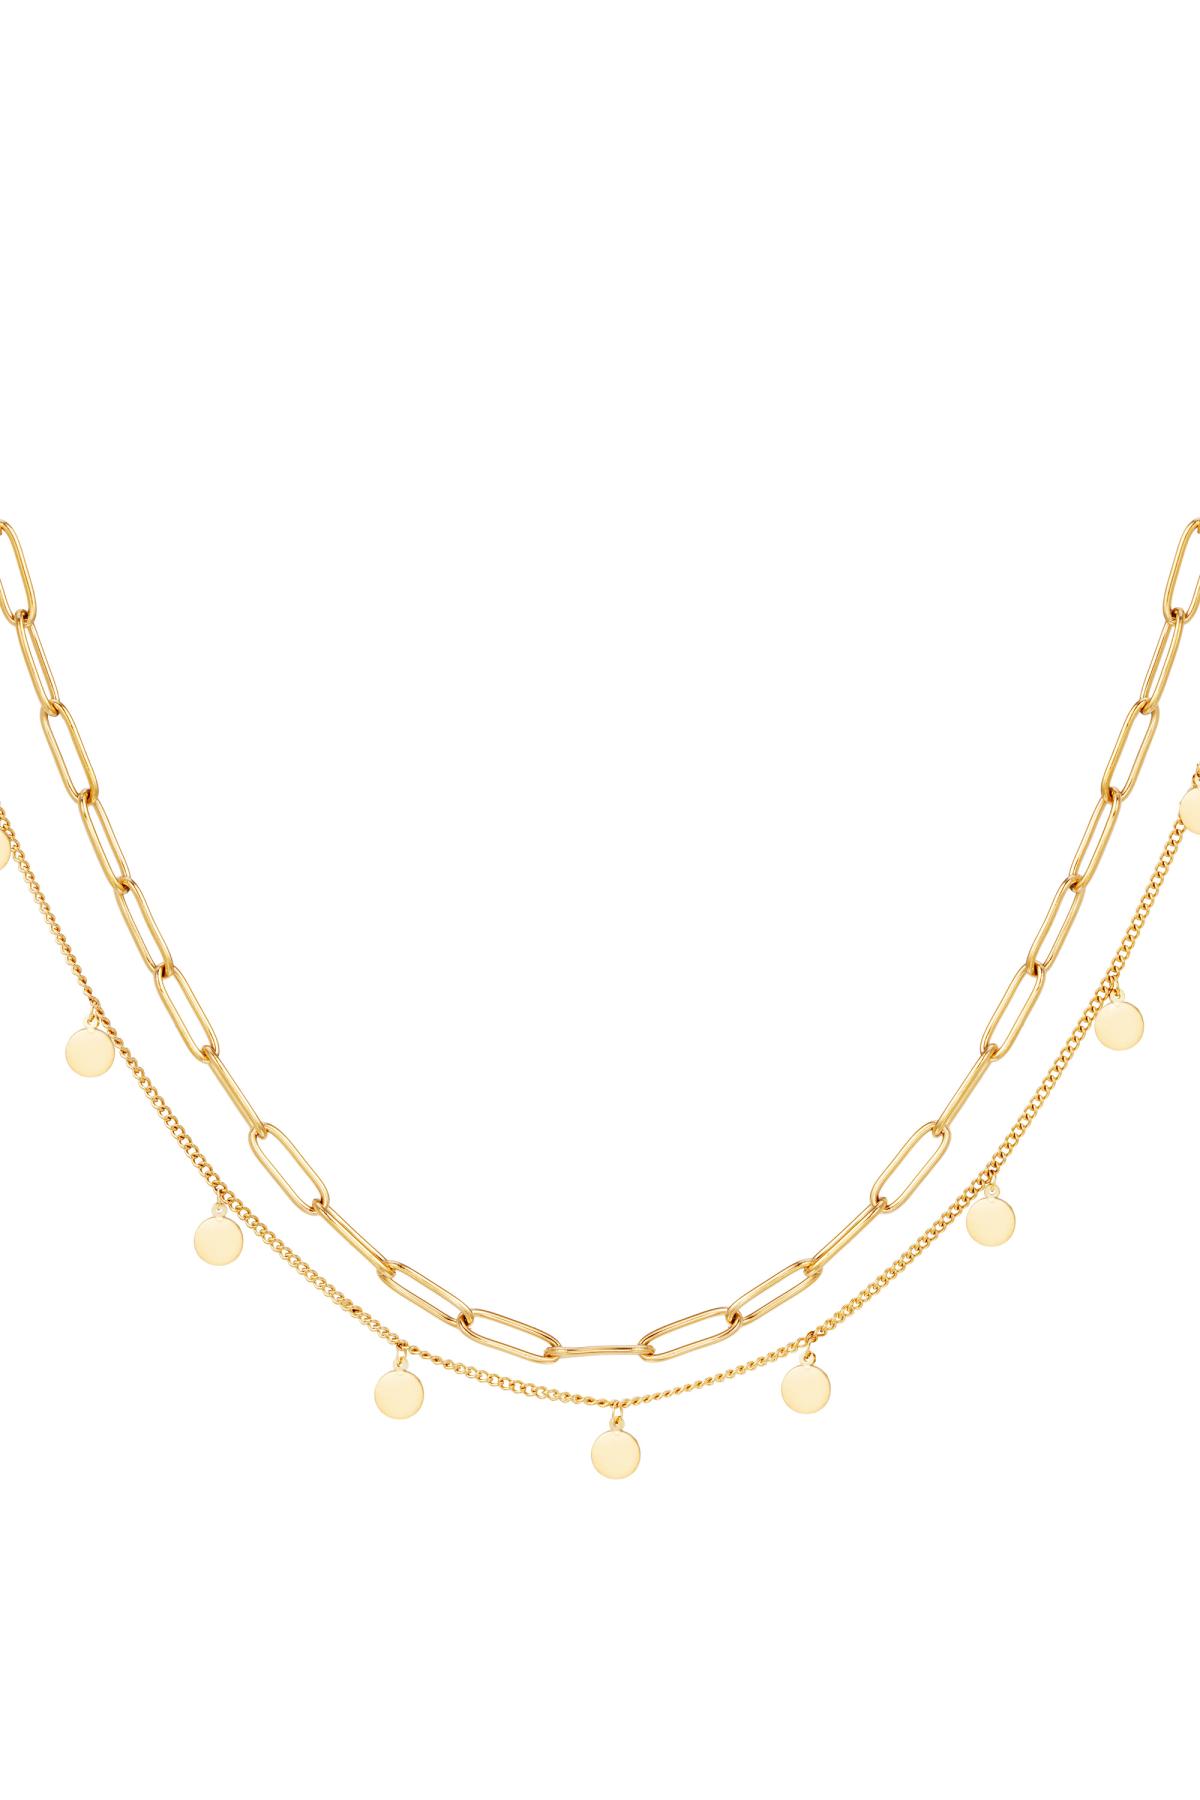 Gold / Double stainless steel necklace Gold Picture2